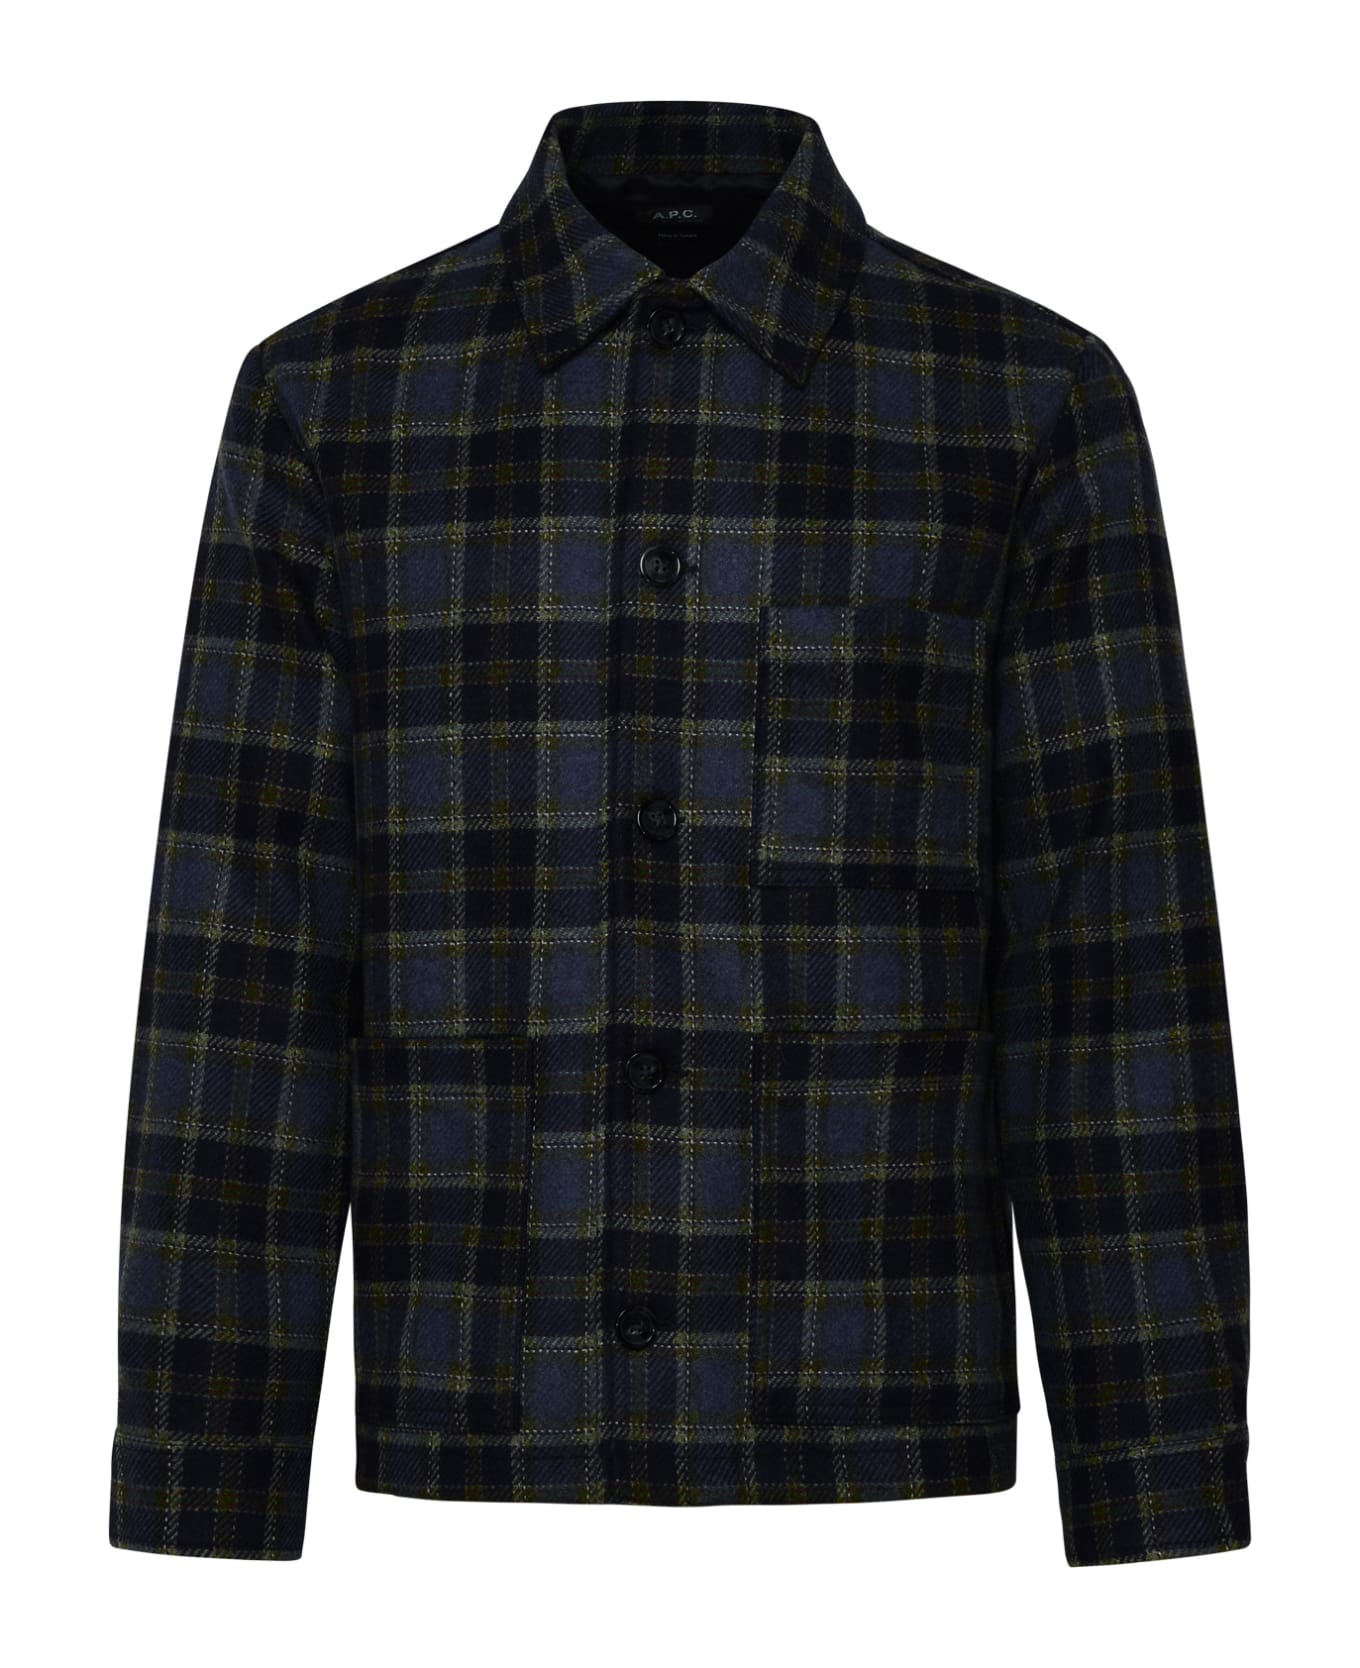 A.P.C. New Emile Shirt In Blue Wool Blend - Red